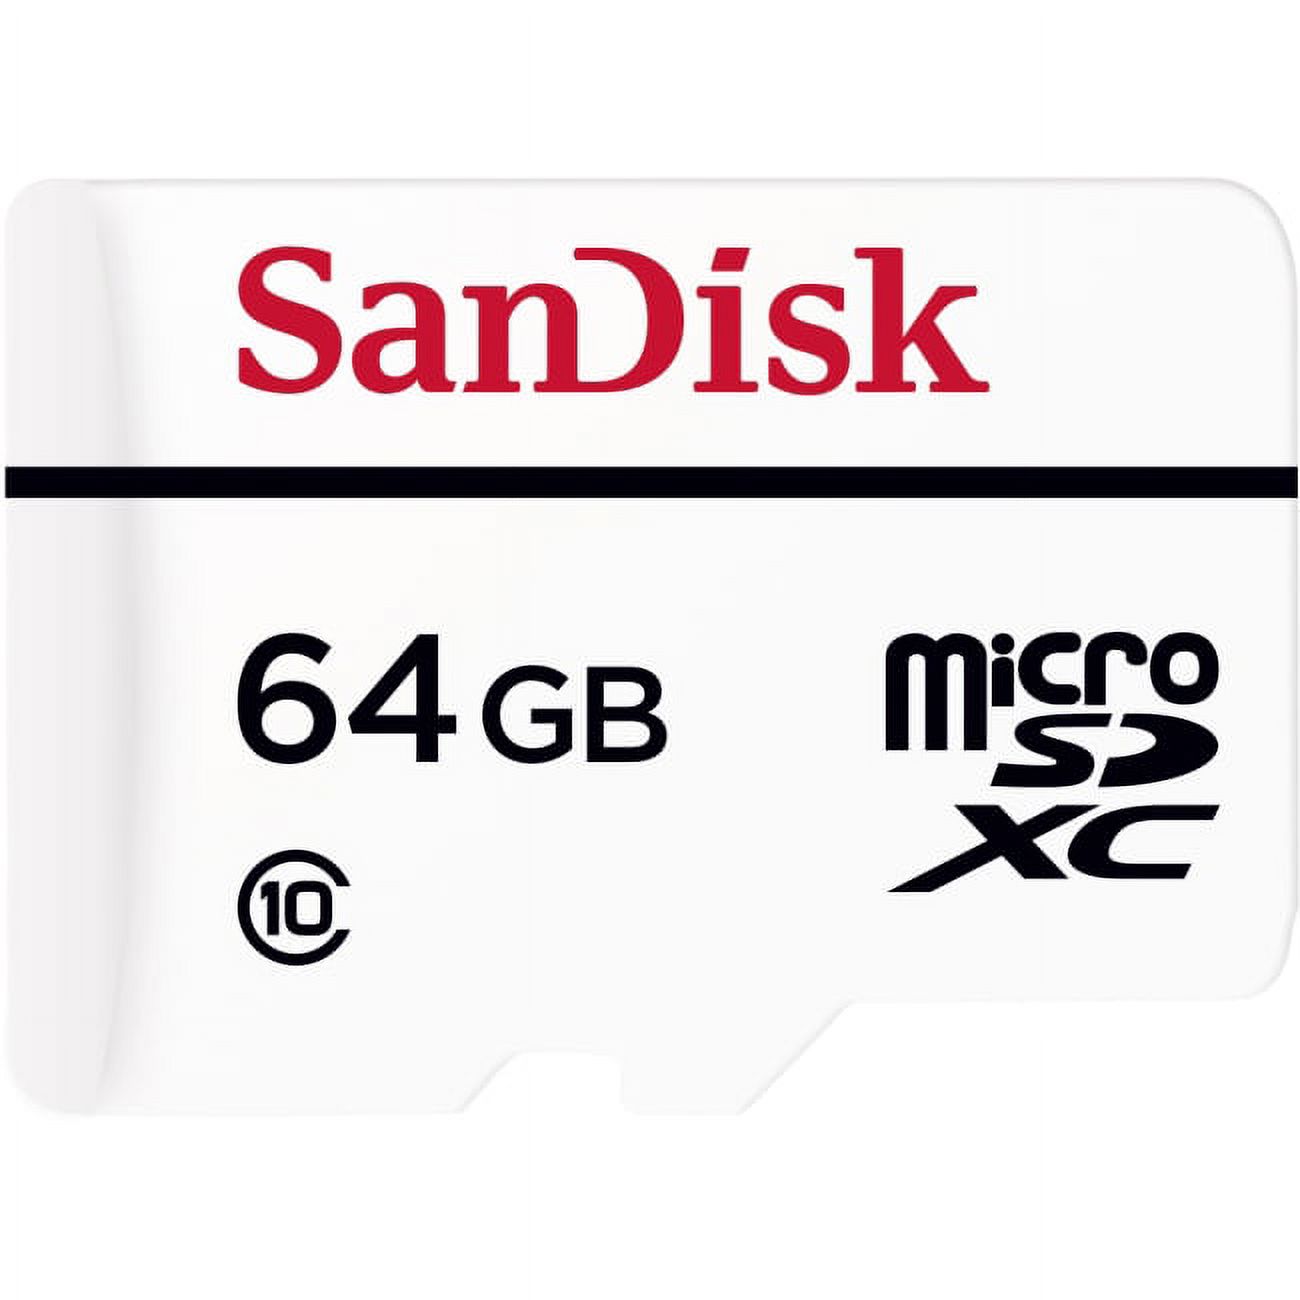 SanDisk 64GB microSDXC High Endurance Video Monitoring Card with Adapter - C10, Full HD, Micro SD Card - SDSDQQ-064G-G46A - image 1 of 8